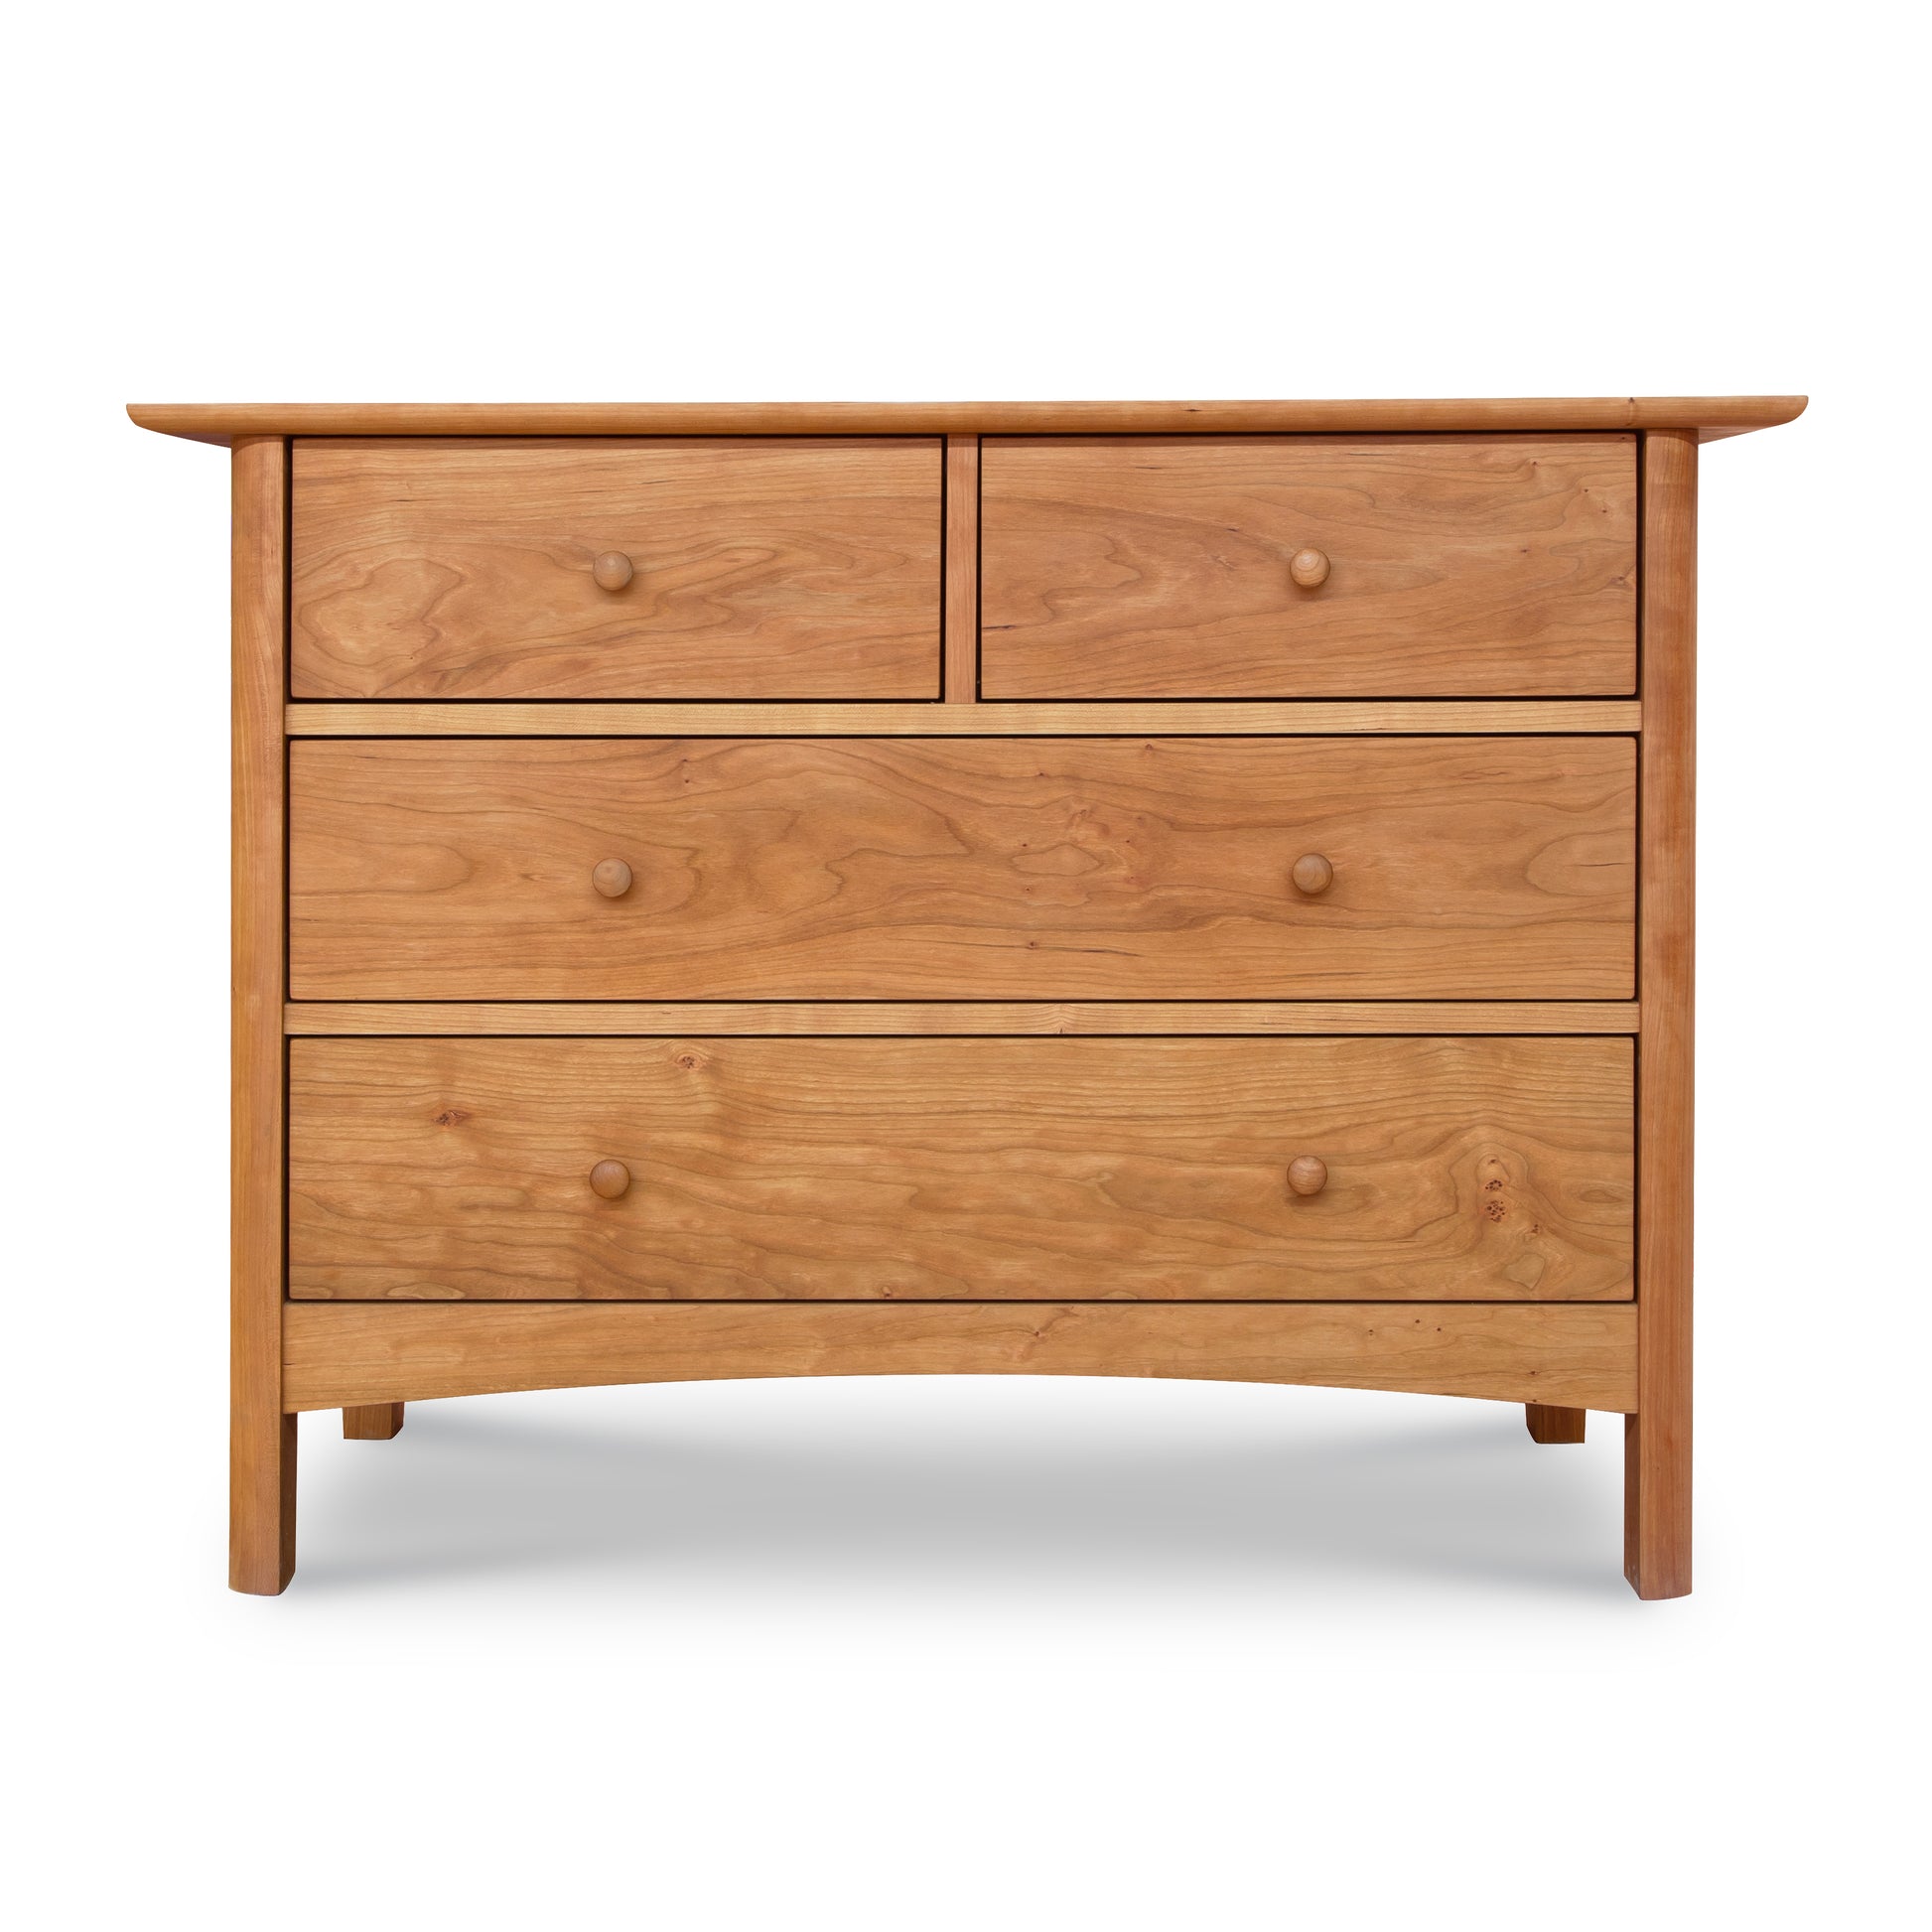 A luxurious Heartwood Shaker 4-Drawer Dresser by Vermont Furniture Designs on a white background.